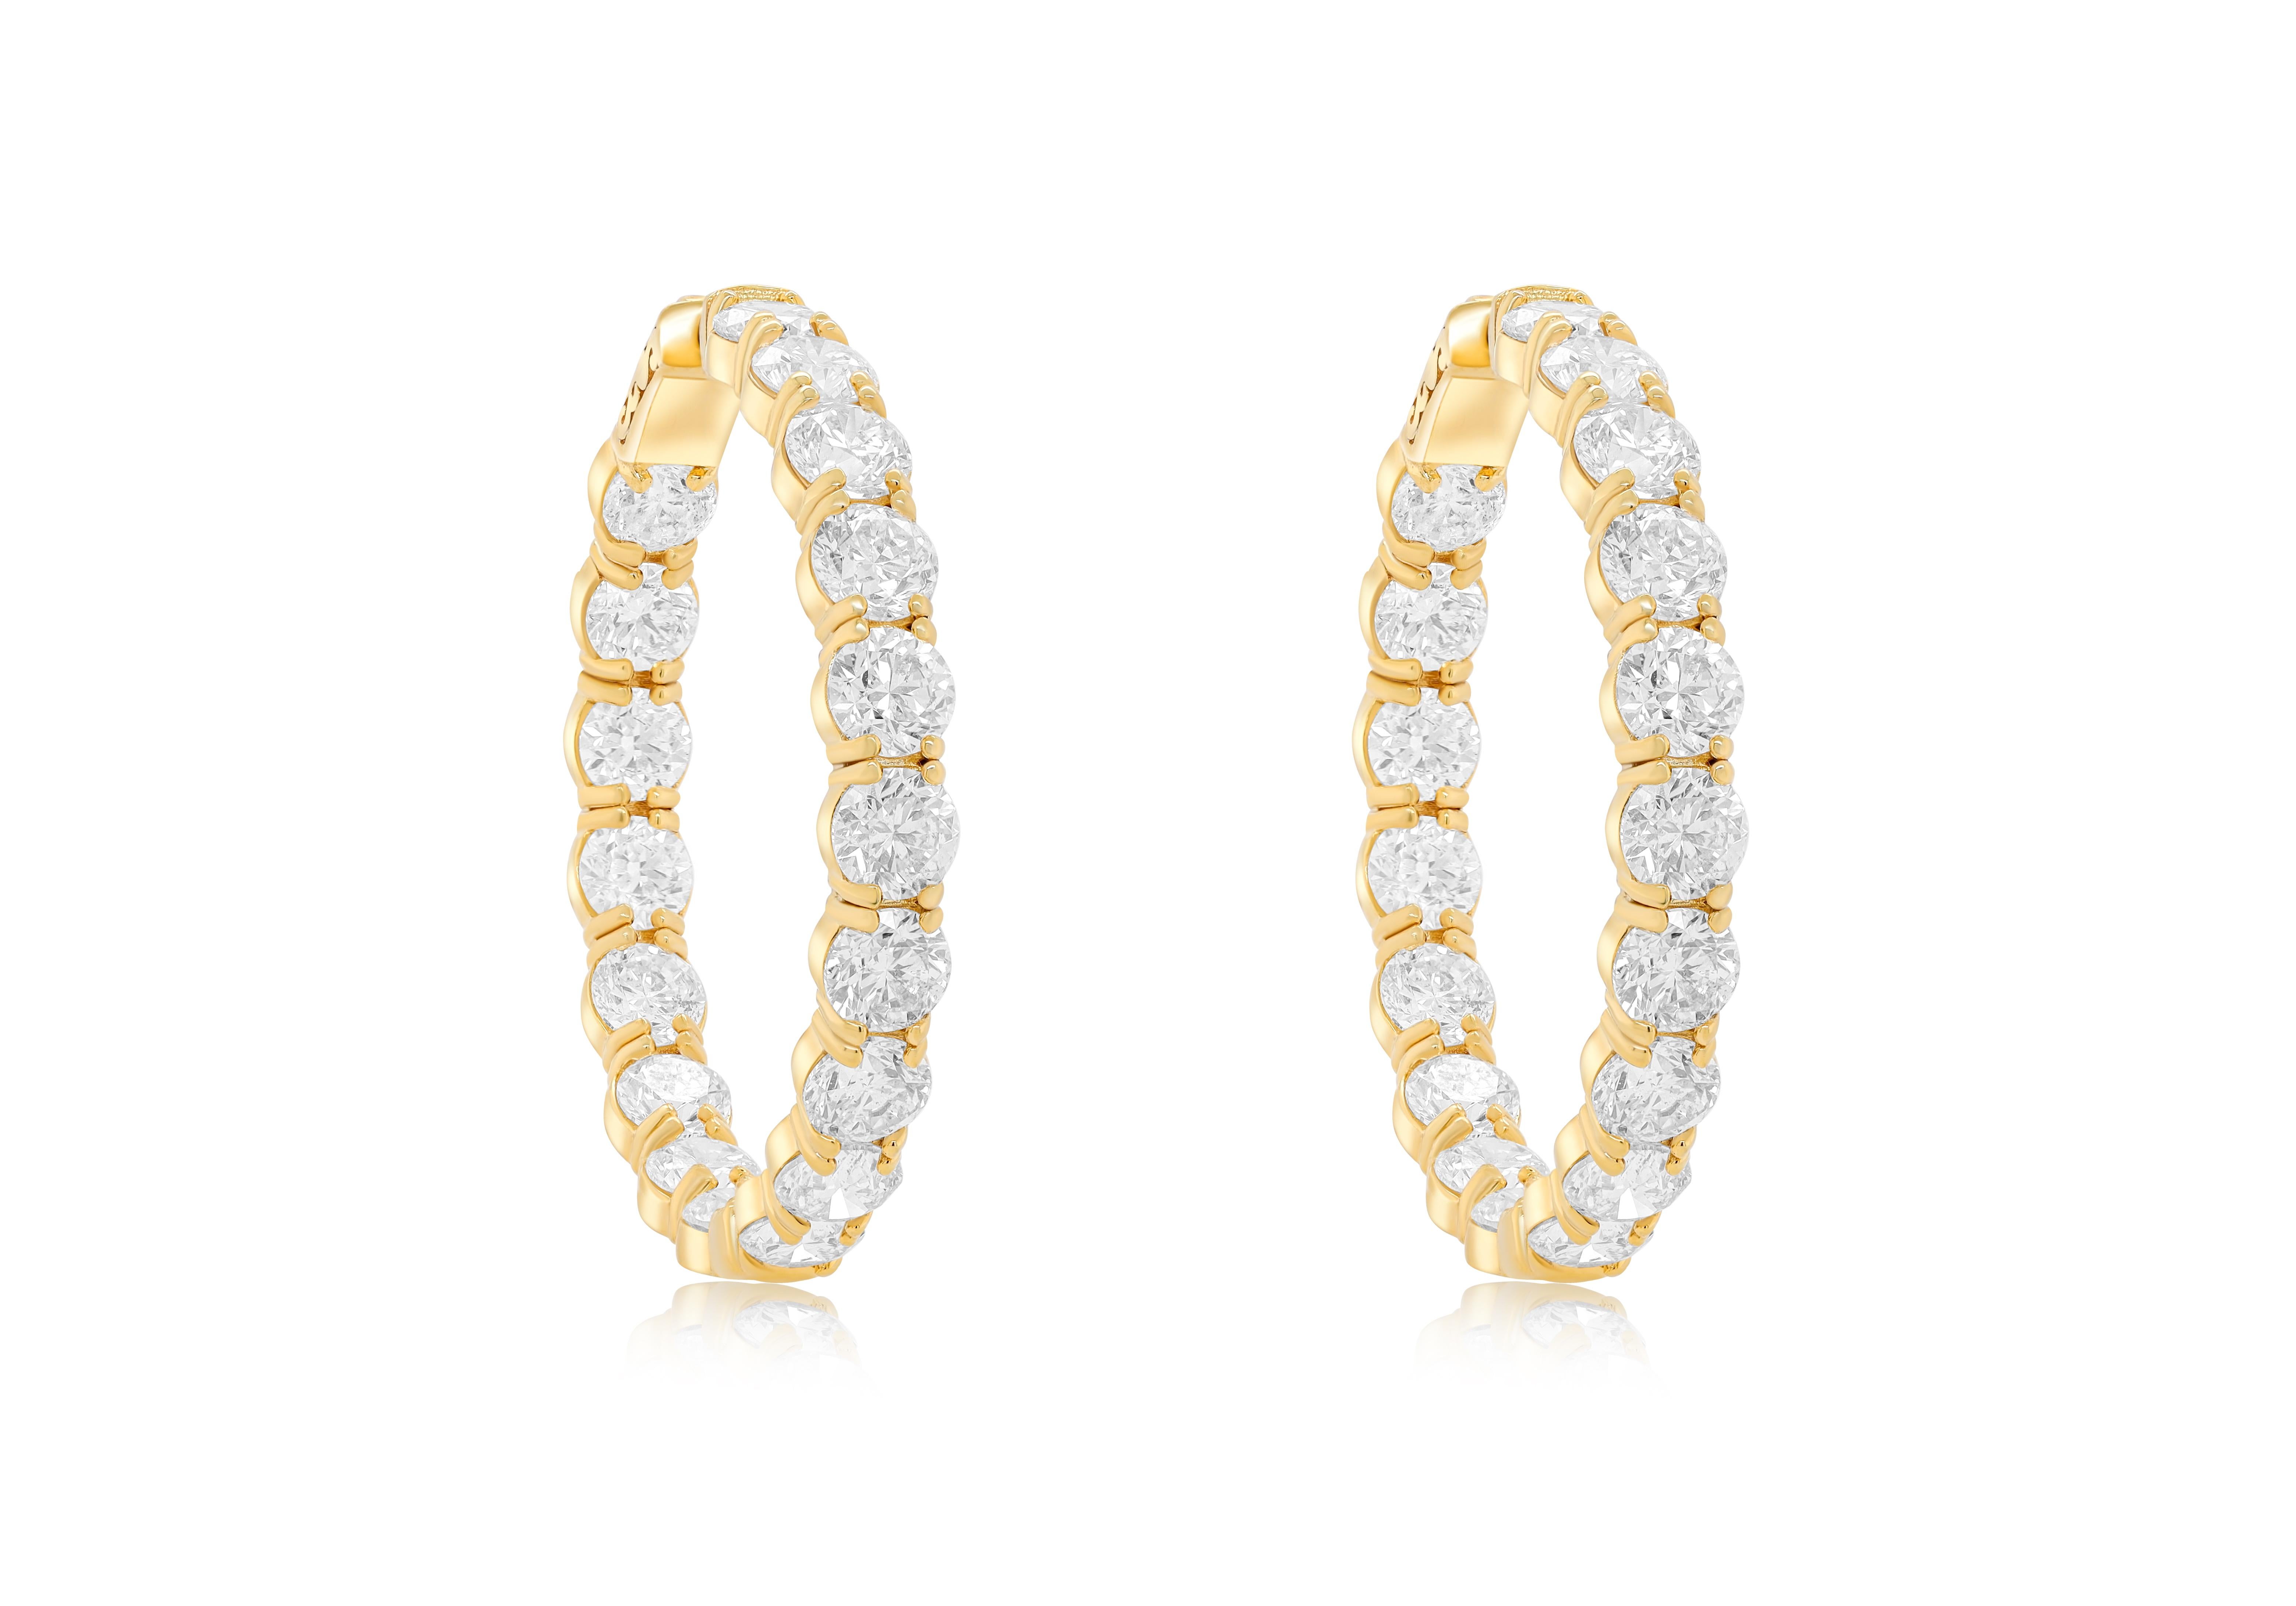 18 kt yellow gold inside-out oval shape hoop earrings adorned with 8.20 cts tw of round diamonds (32 stones)
Diana M. is a leading supplier of top-quality fine jewelry for over 35 years.
Diana M is one-stop shop for all your jewelry shopping,